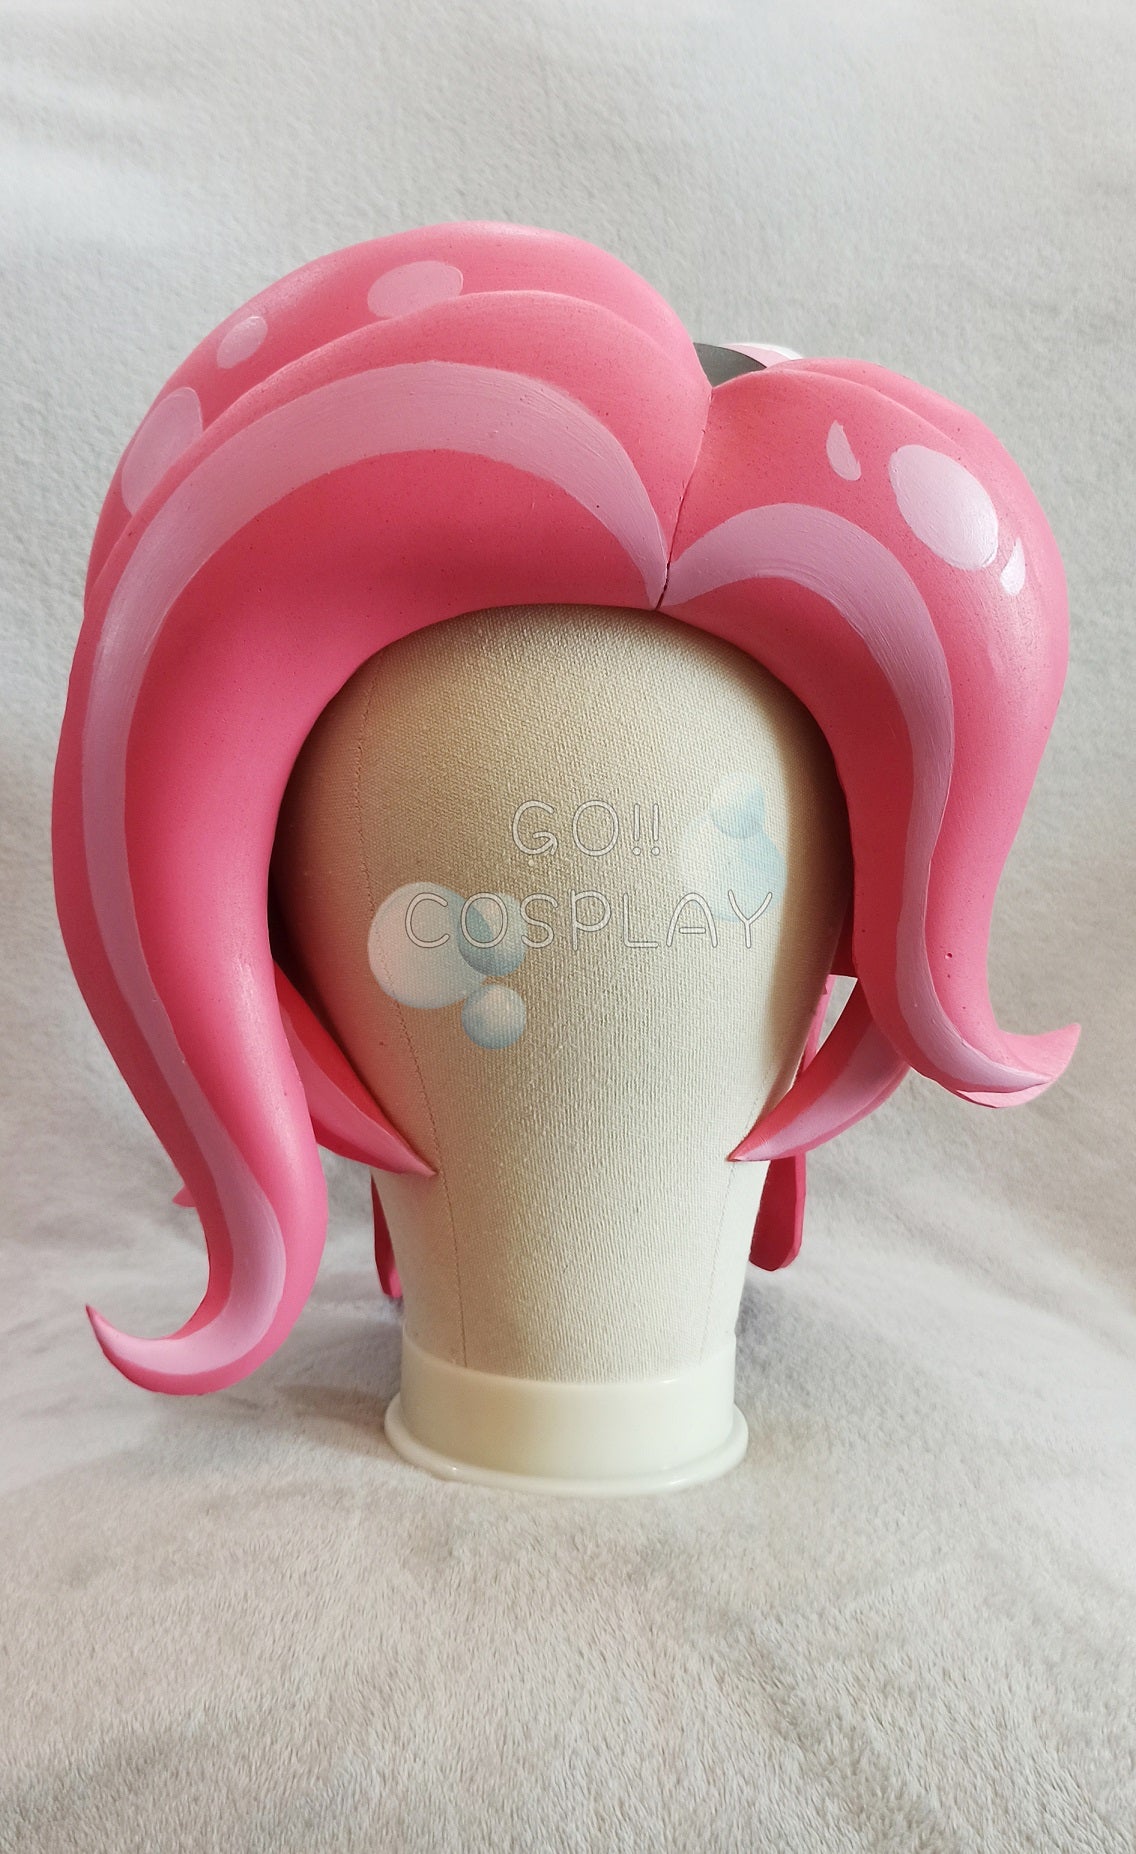 Ln'eta Cosplay Wig made of EVA and PVC Perfect for Cosplay